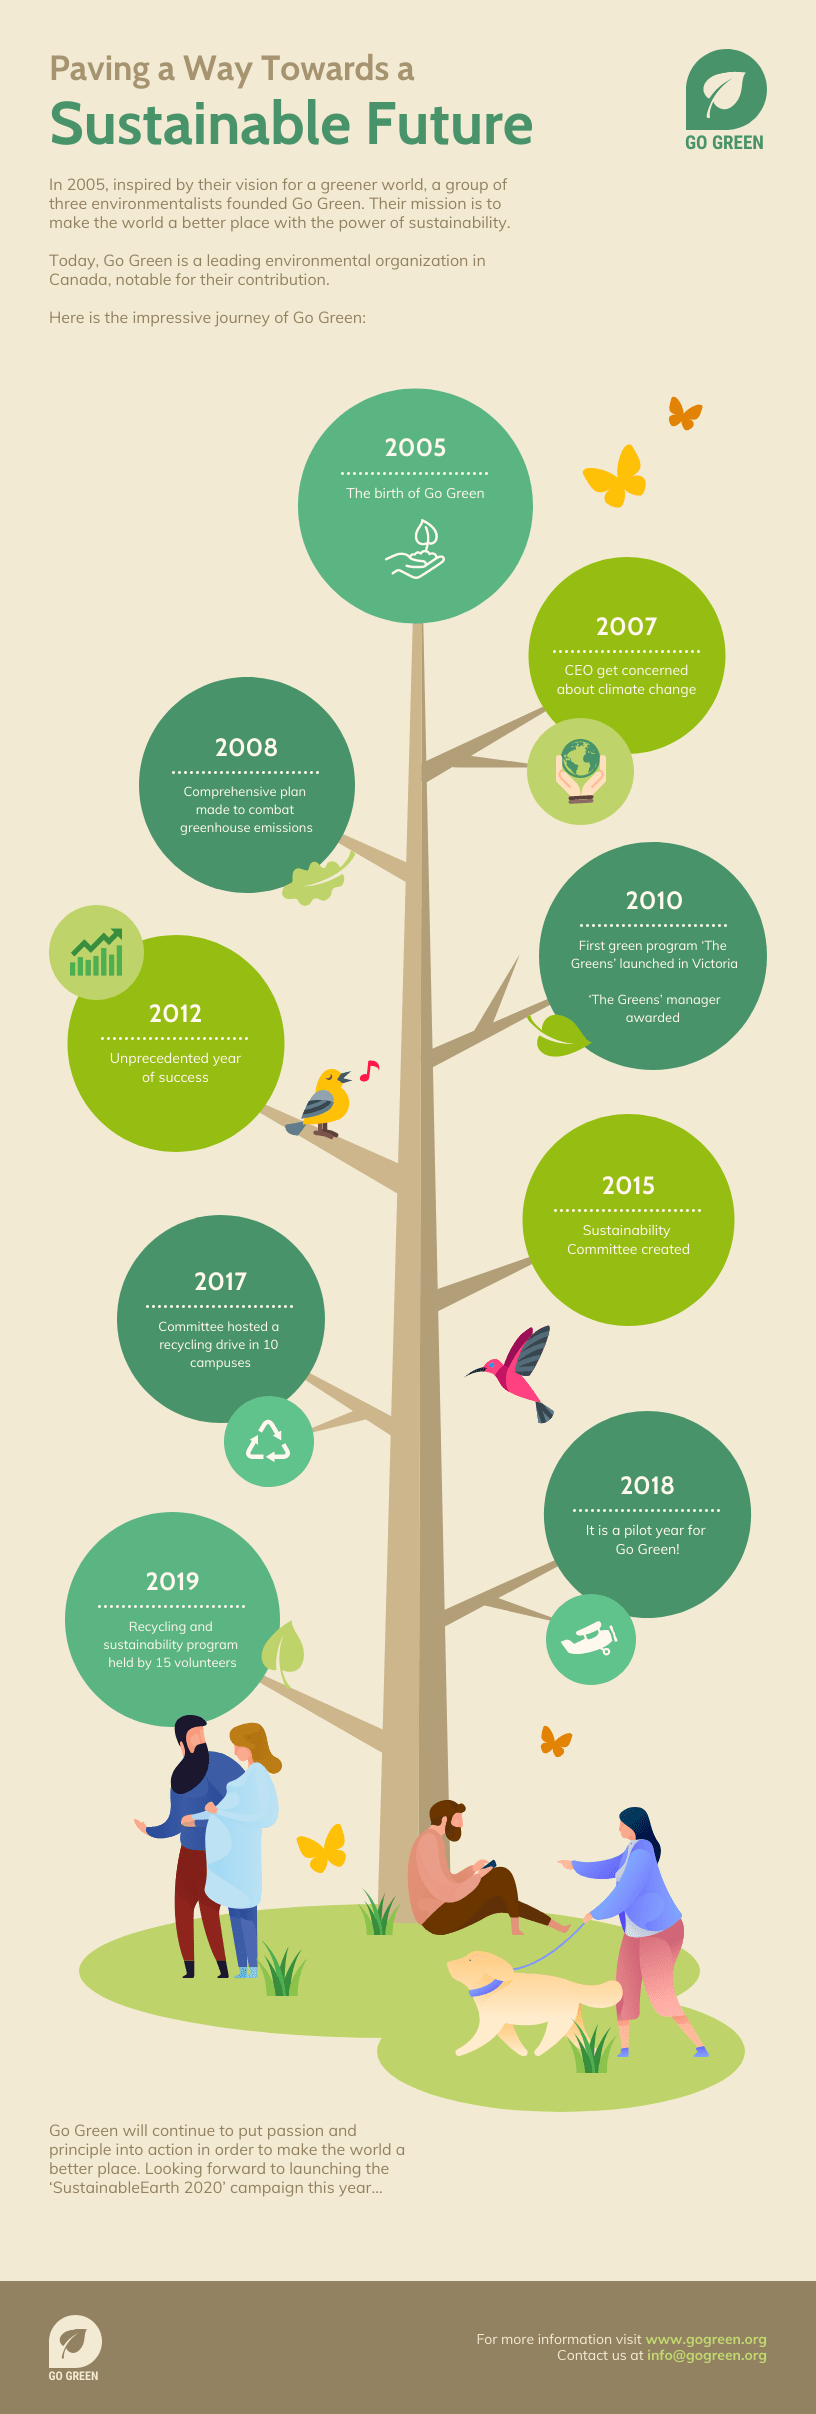 Go Green Timeline Infographic